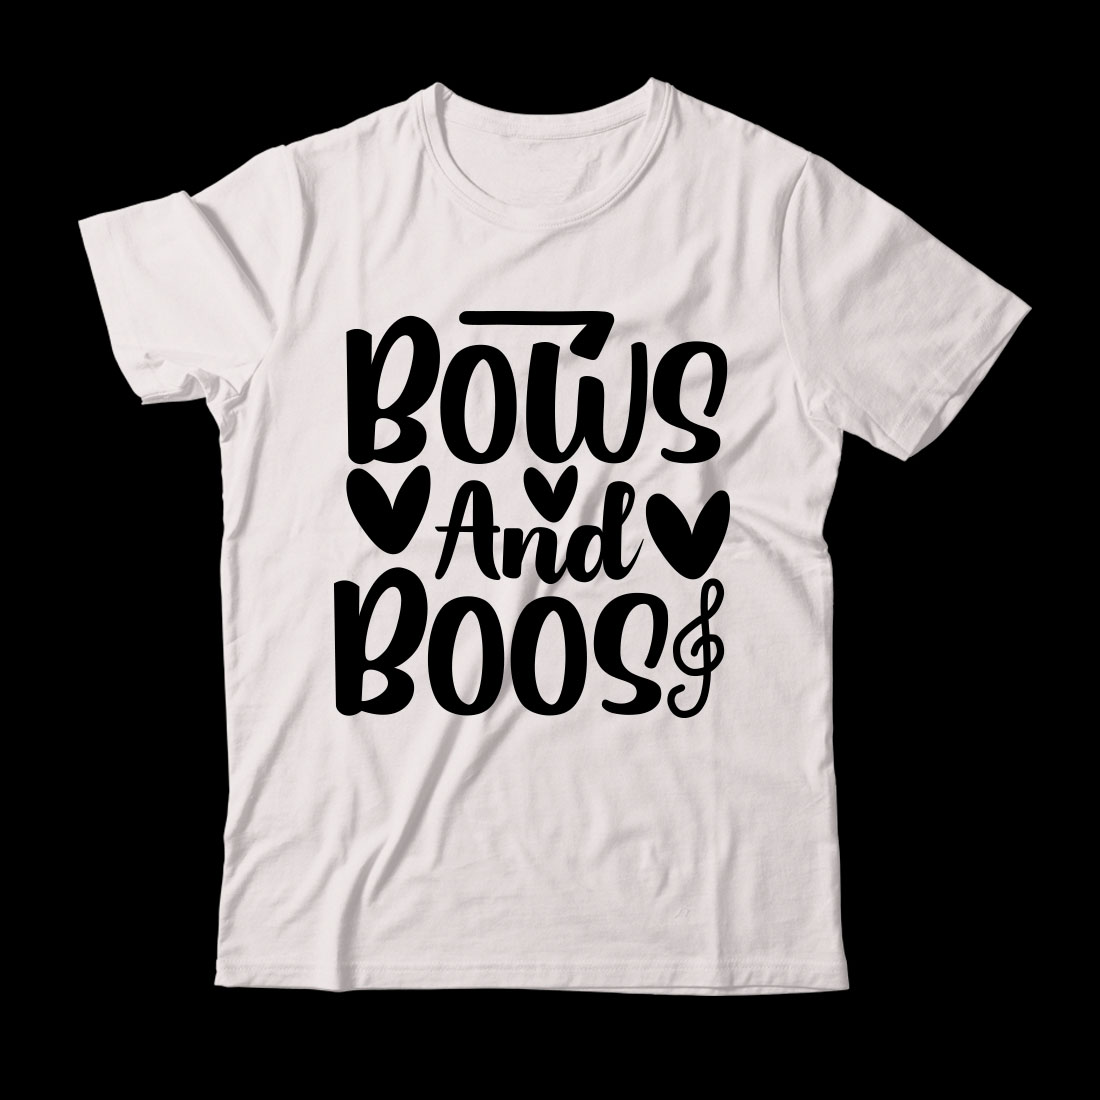 White t - shirt with the words boys and boos on it.